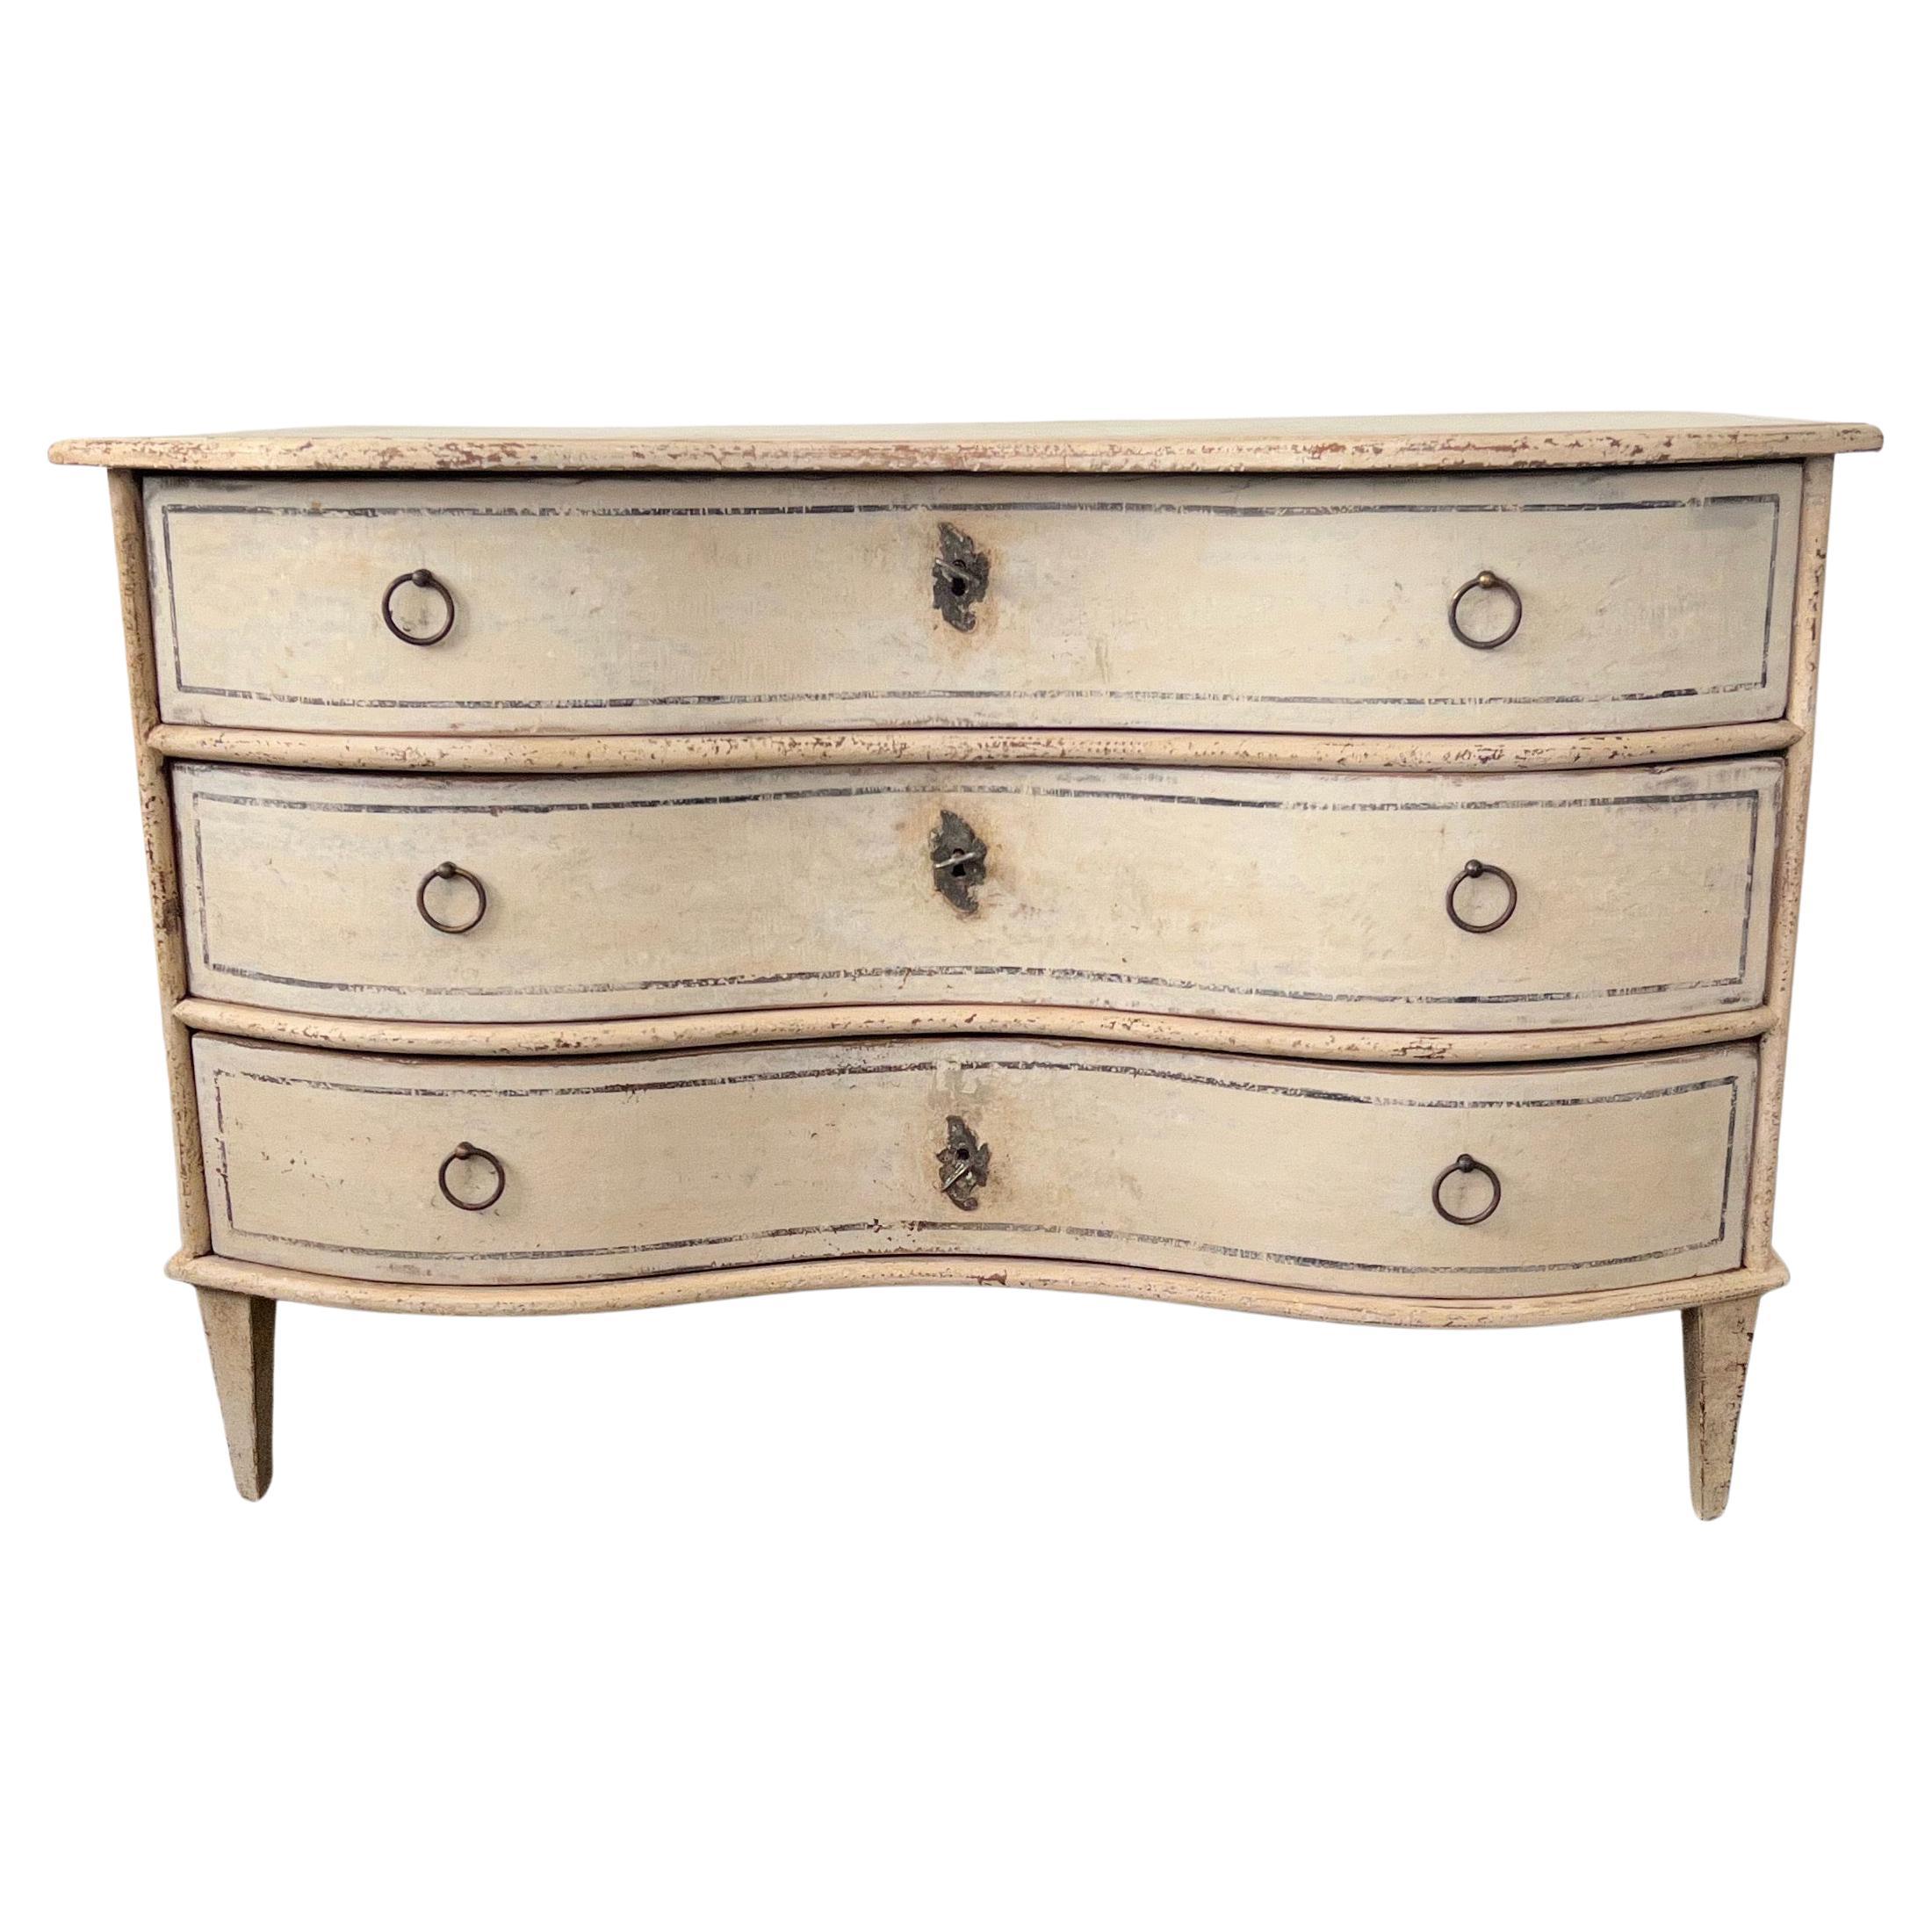 18th Century German Baroque Chest of Drawers